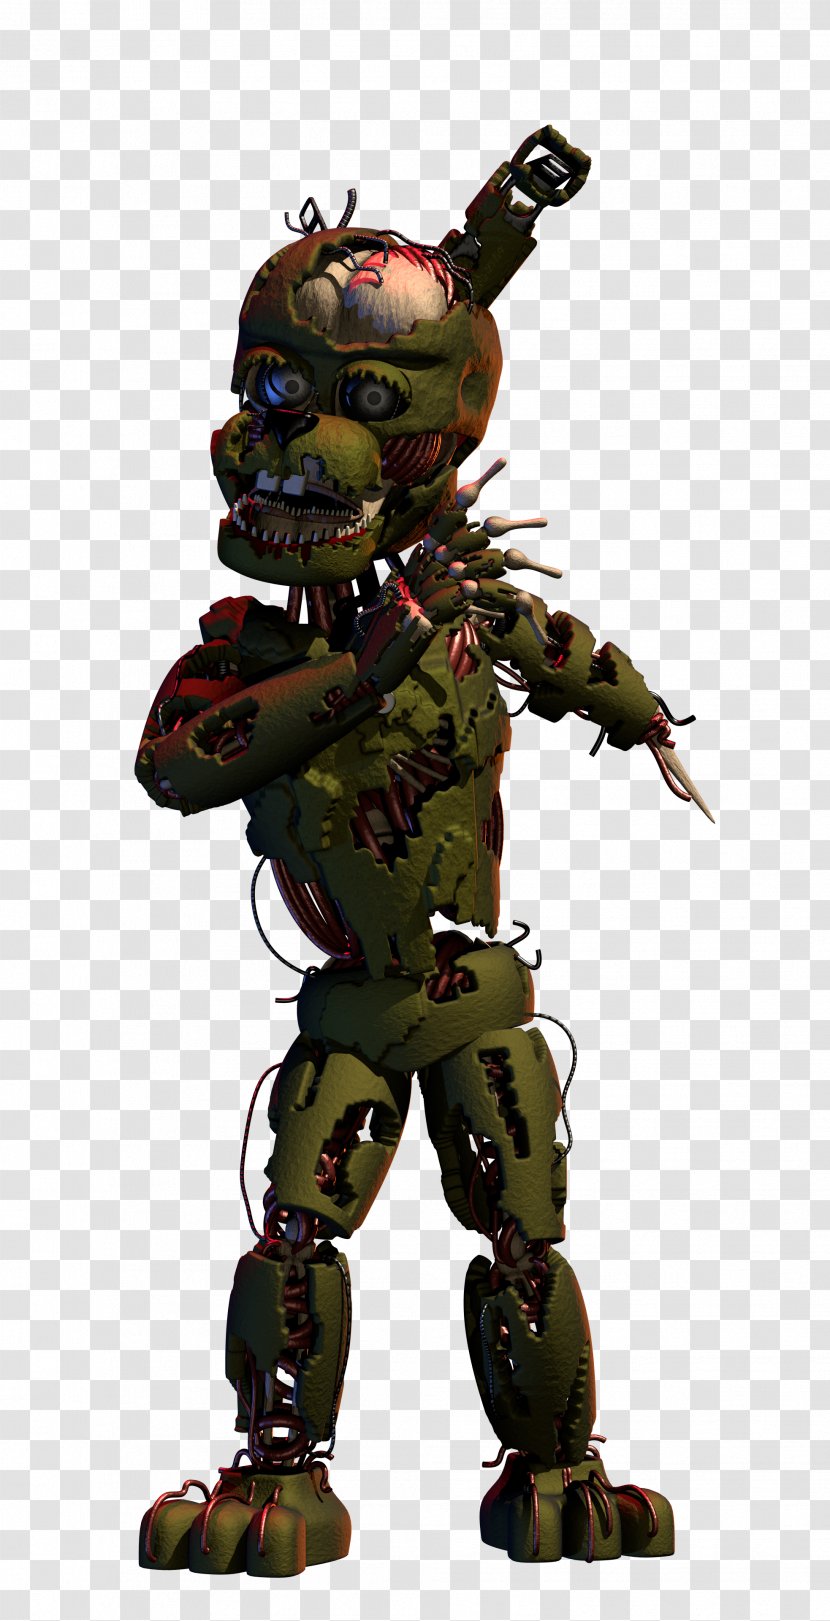 Five Nights At Freddy's Video Jump Scare Art - Frame - Withered Leaf Transparent PNG